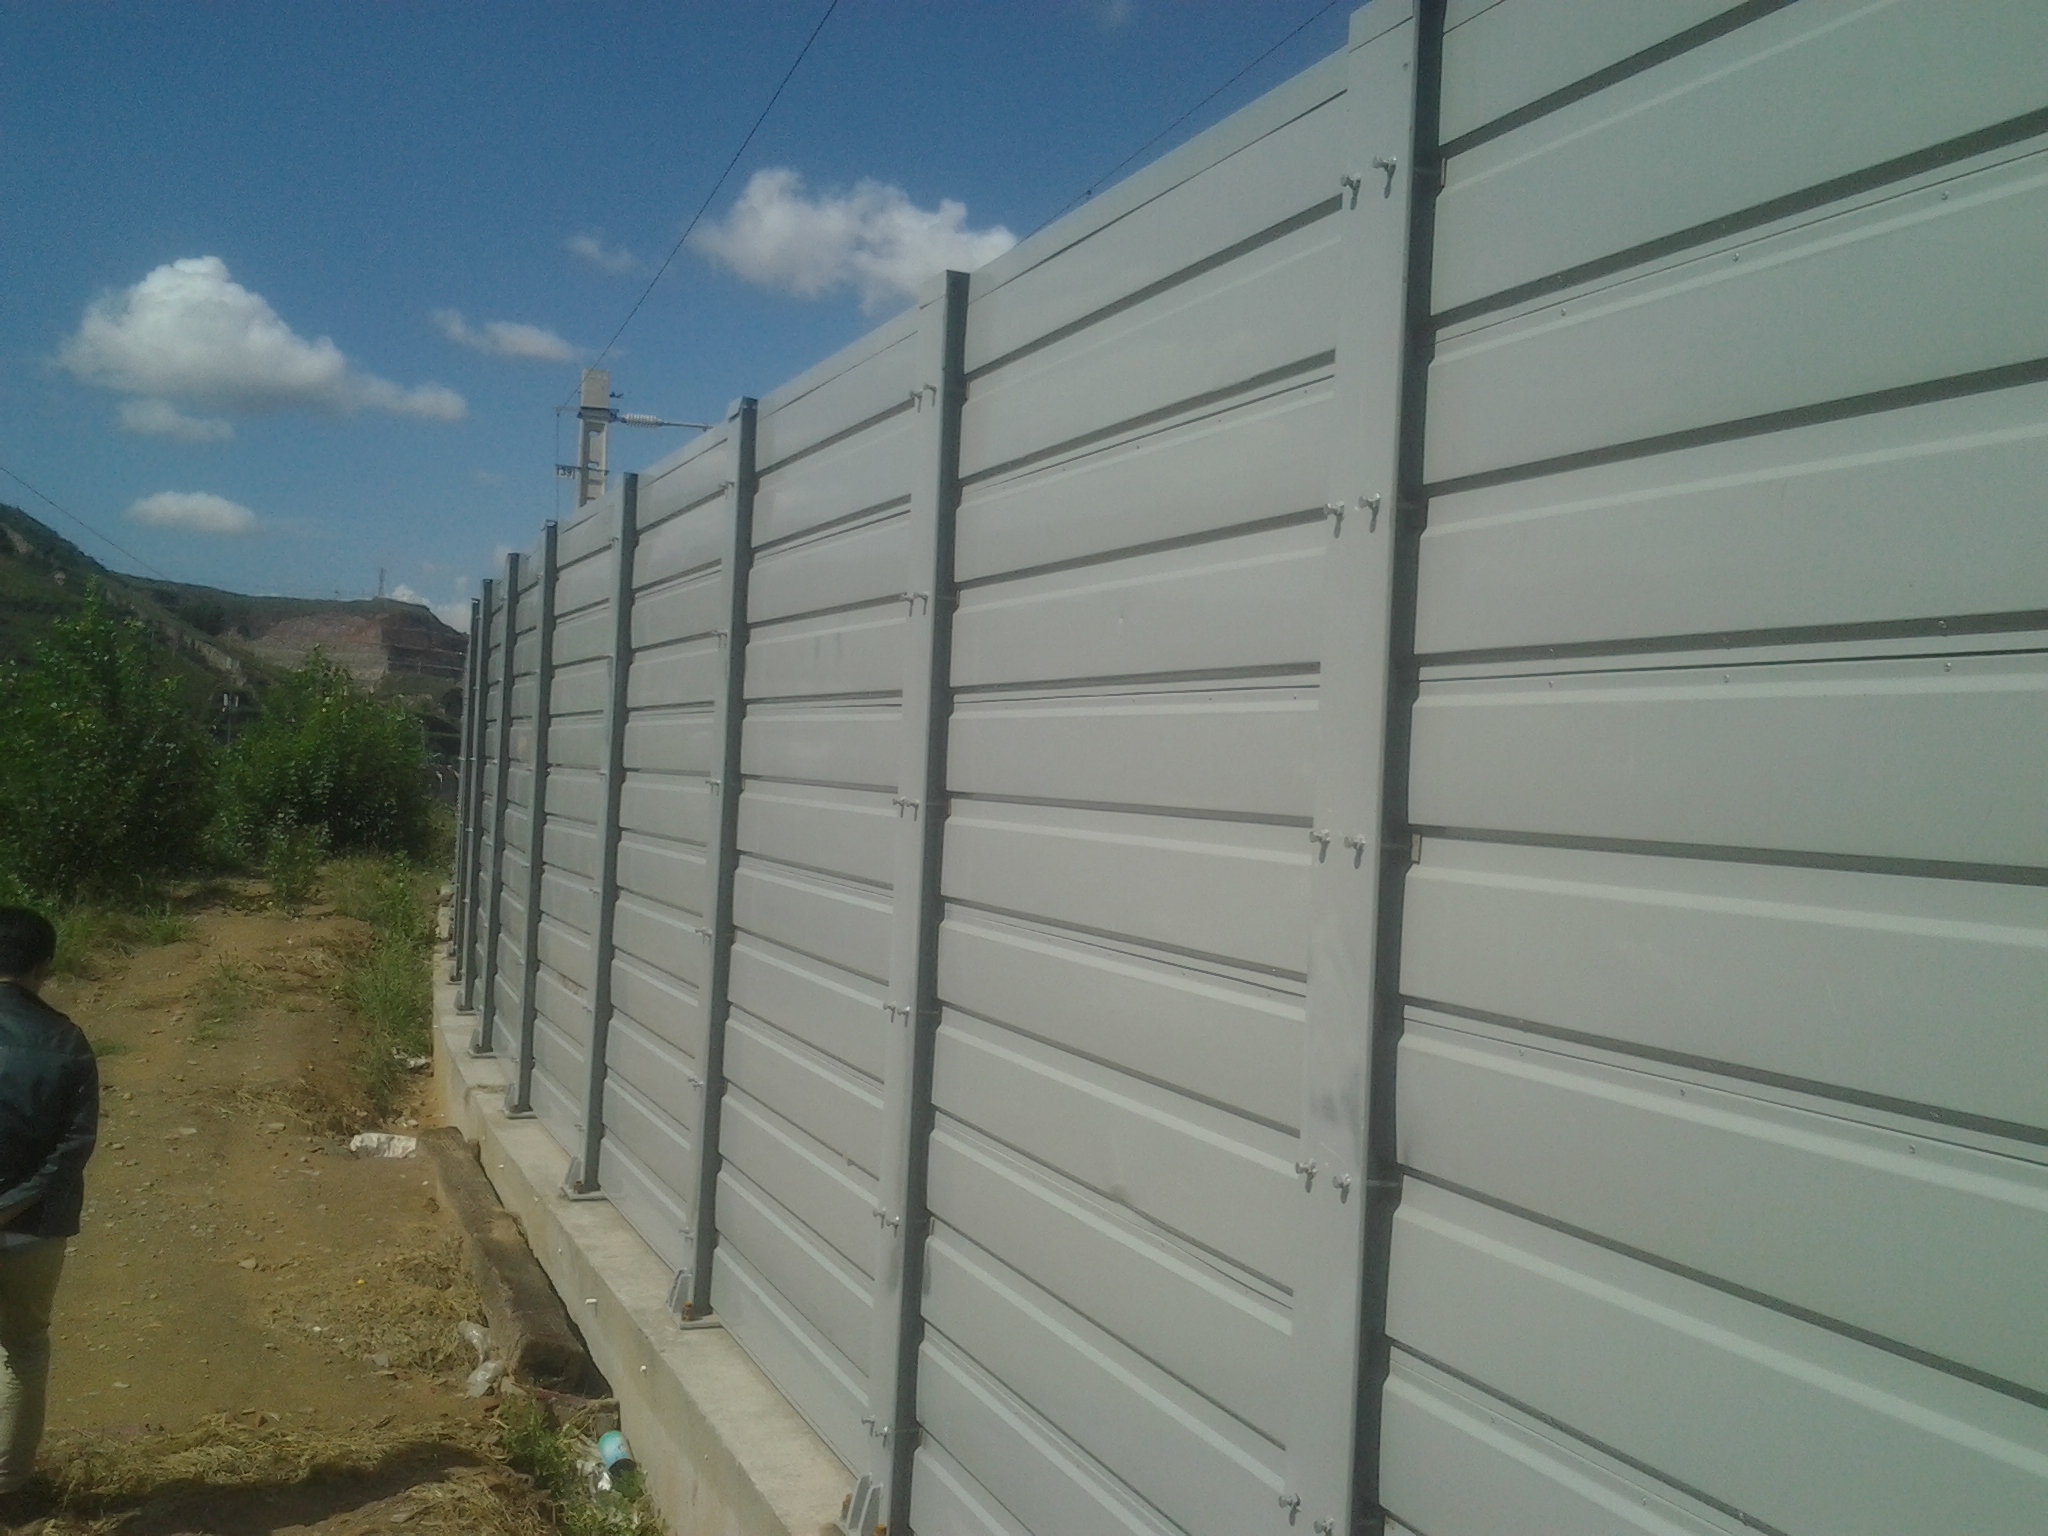 Also known as Noise Walls, Noise Barriers, Noise Fences or Sound Barrier Walls